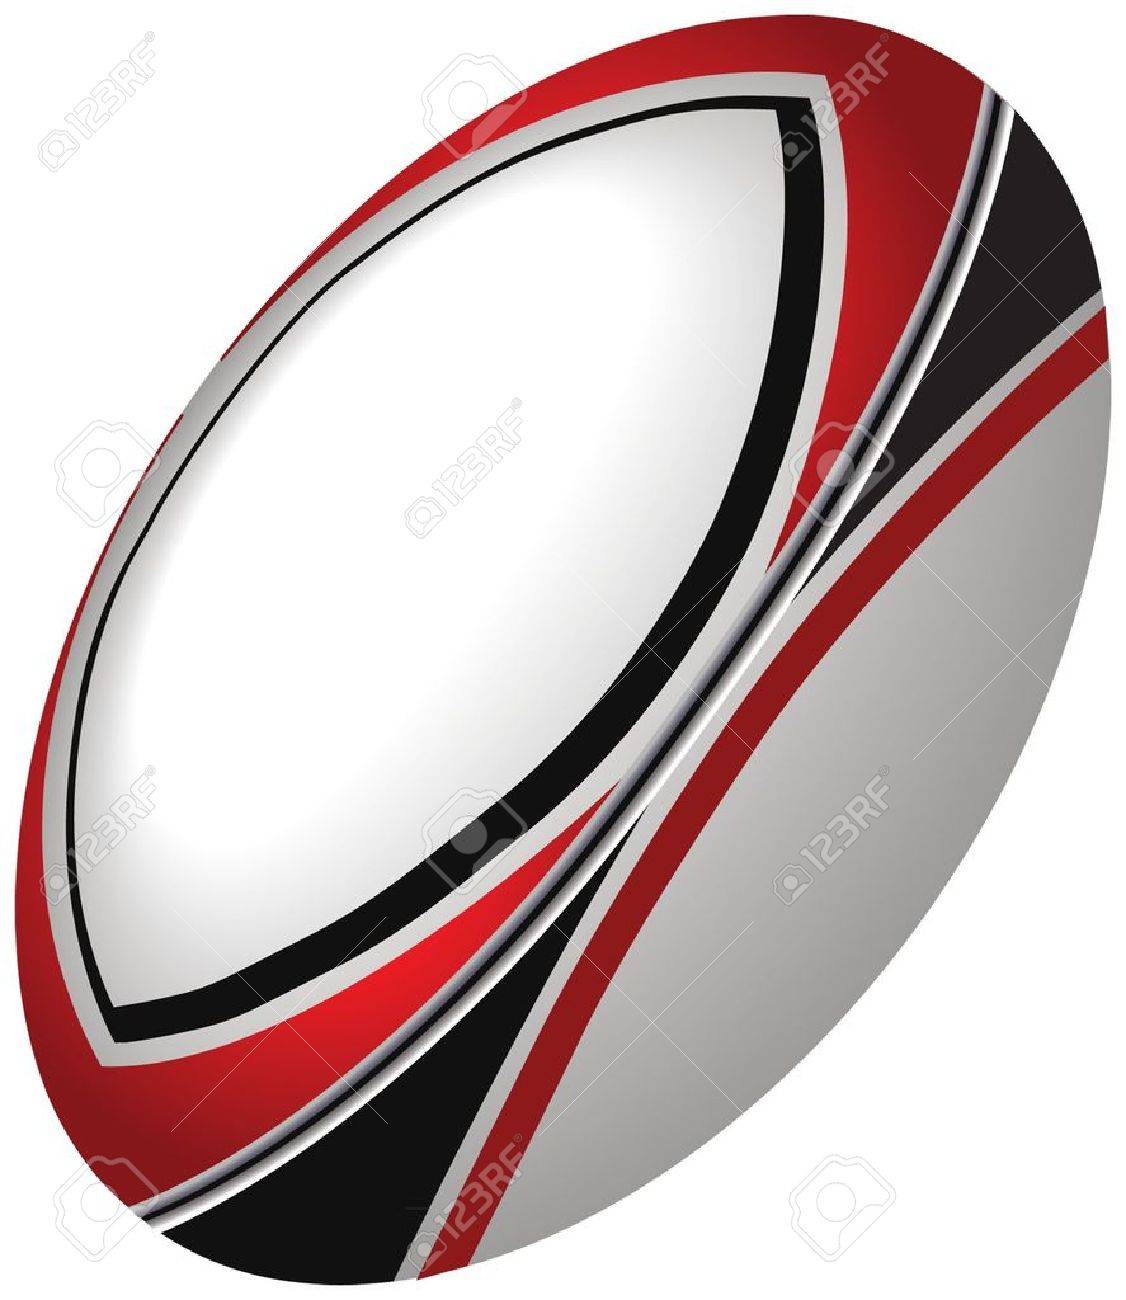 Rugby Ball Stock Vector - 19342603